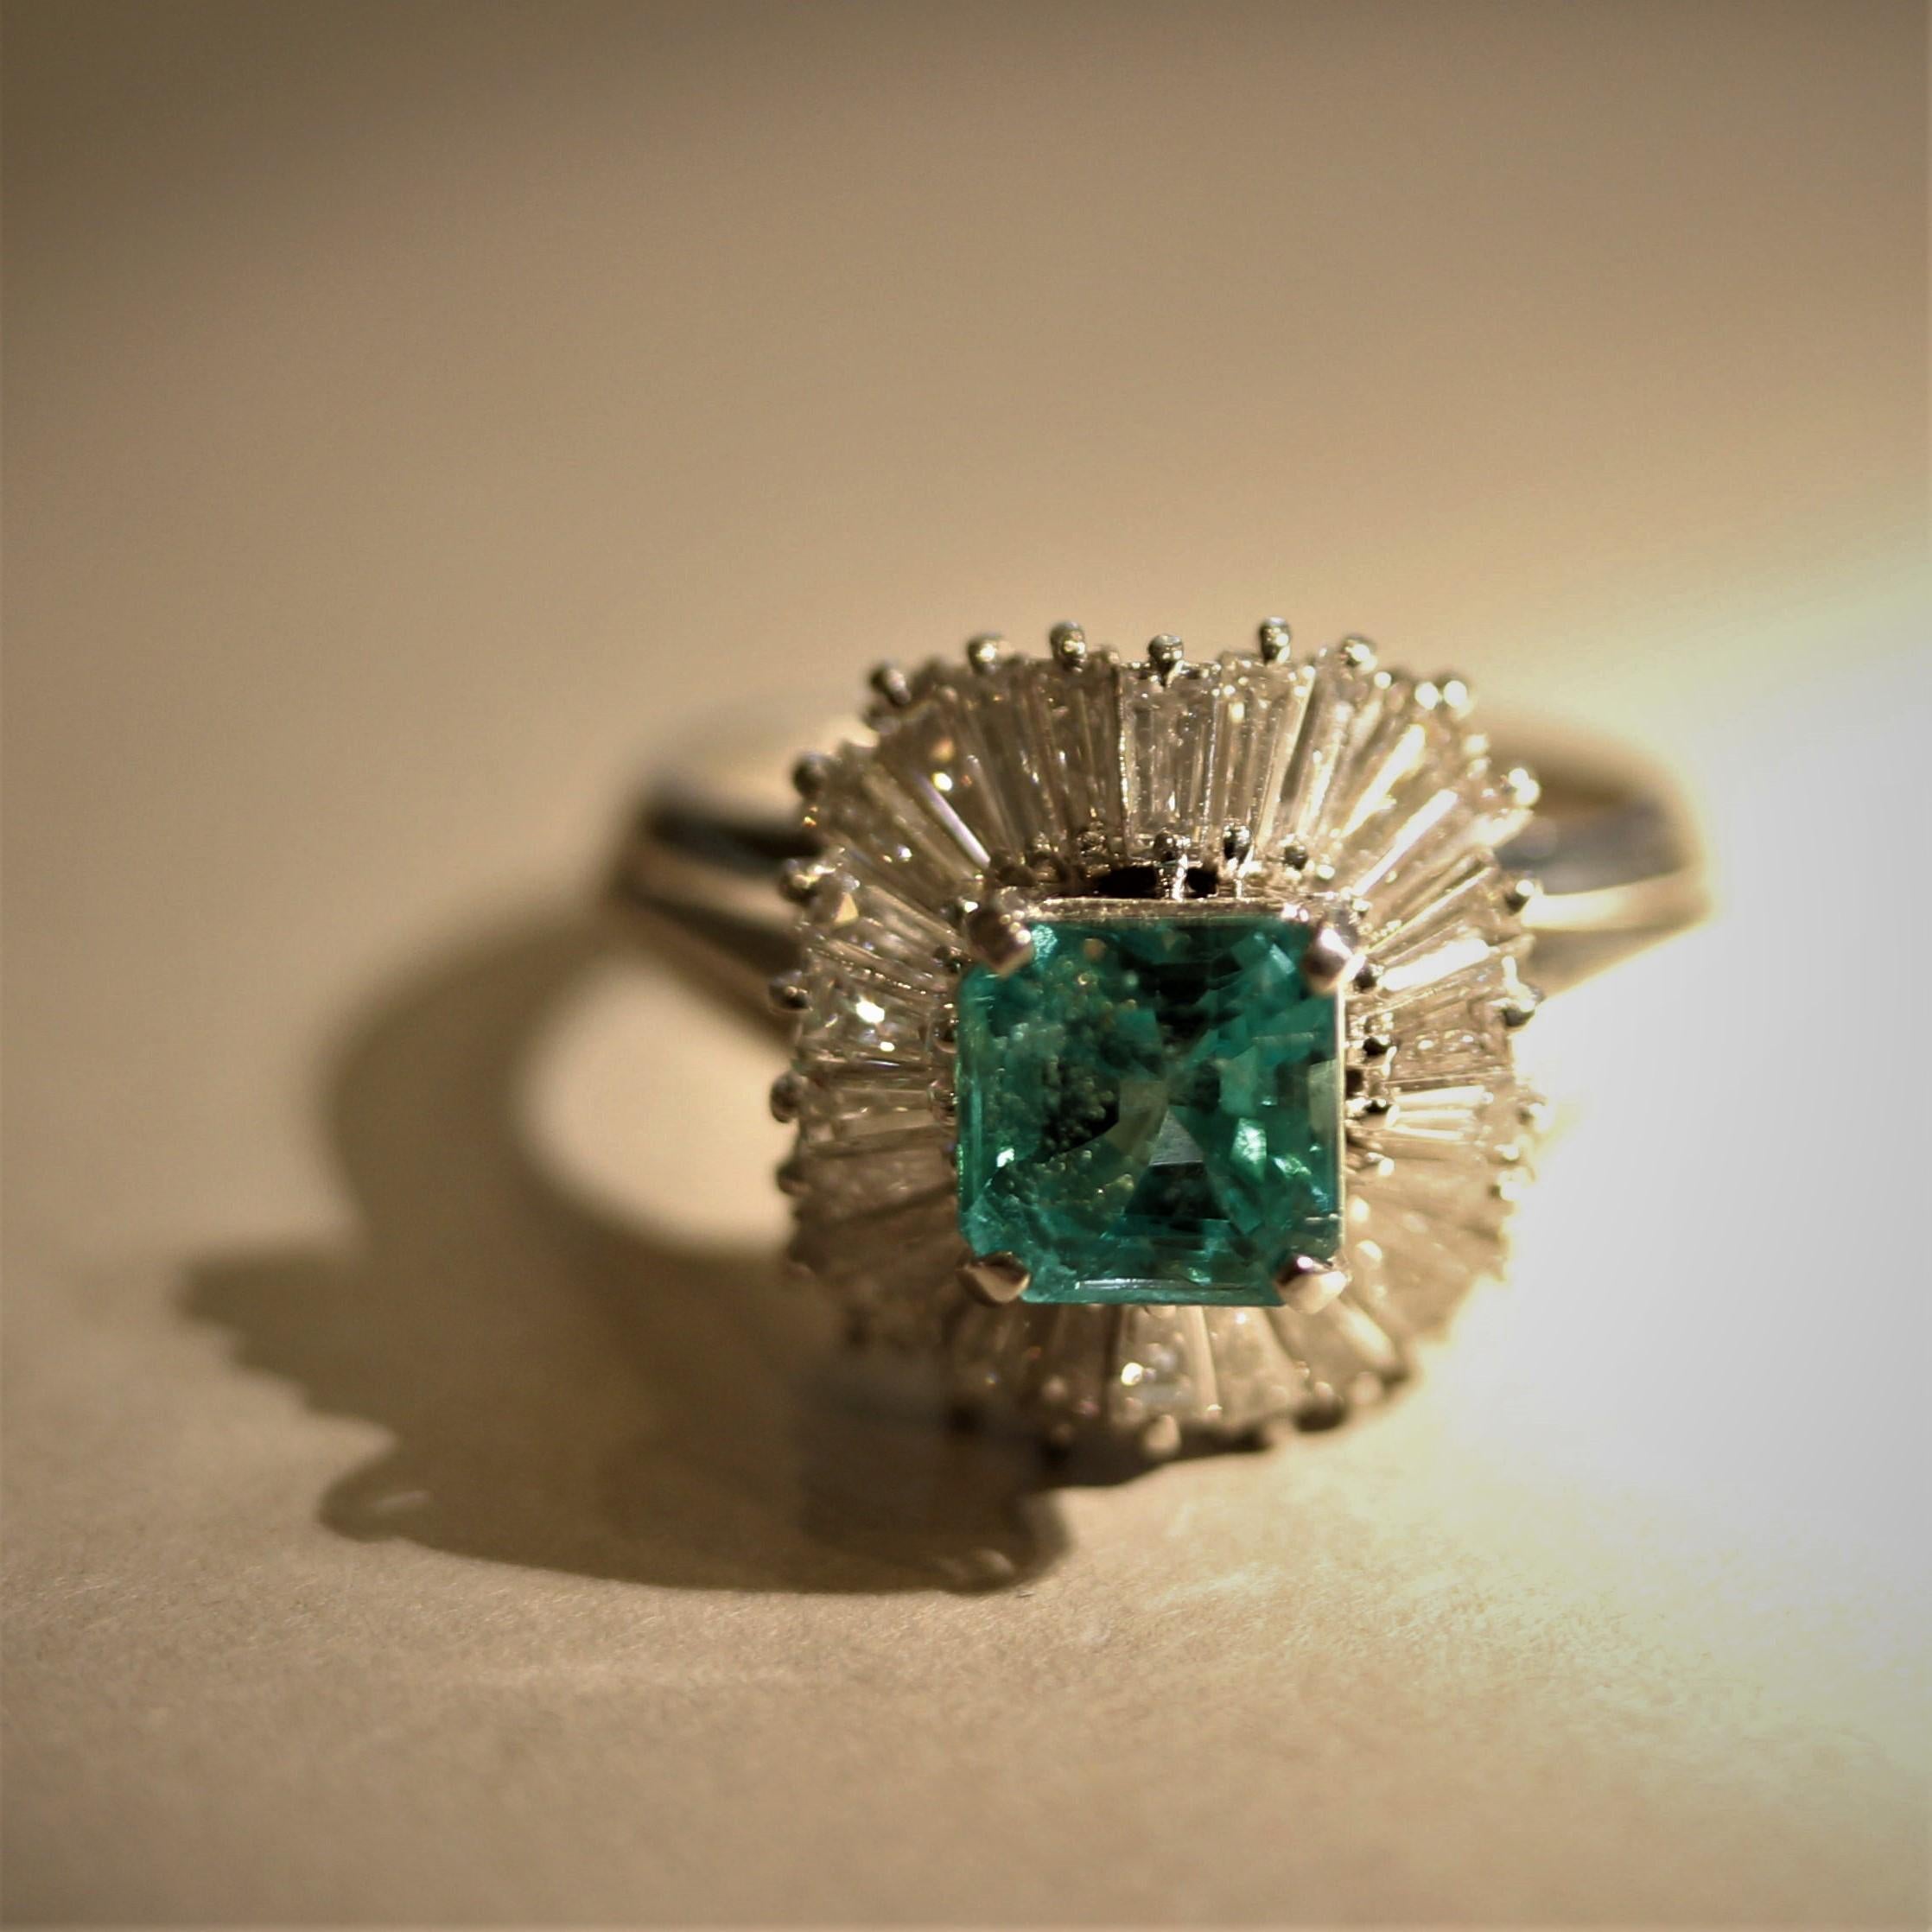 A bright and brilliant platinum gemstone ring! It features a 1.06 carat square-shaped emerald with a bright and clean green color. It is complemented by 1.17 carats of baguette-cut diamonds which are set around the emerald in a sharp sunburst